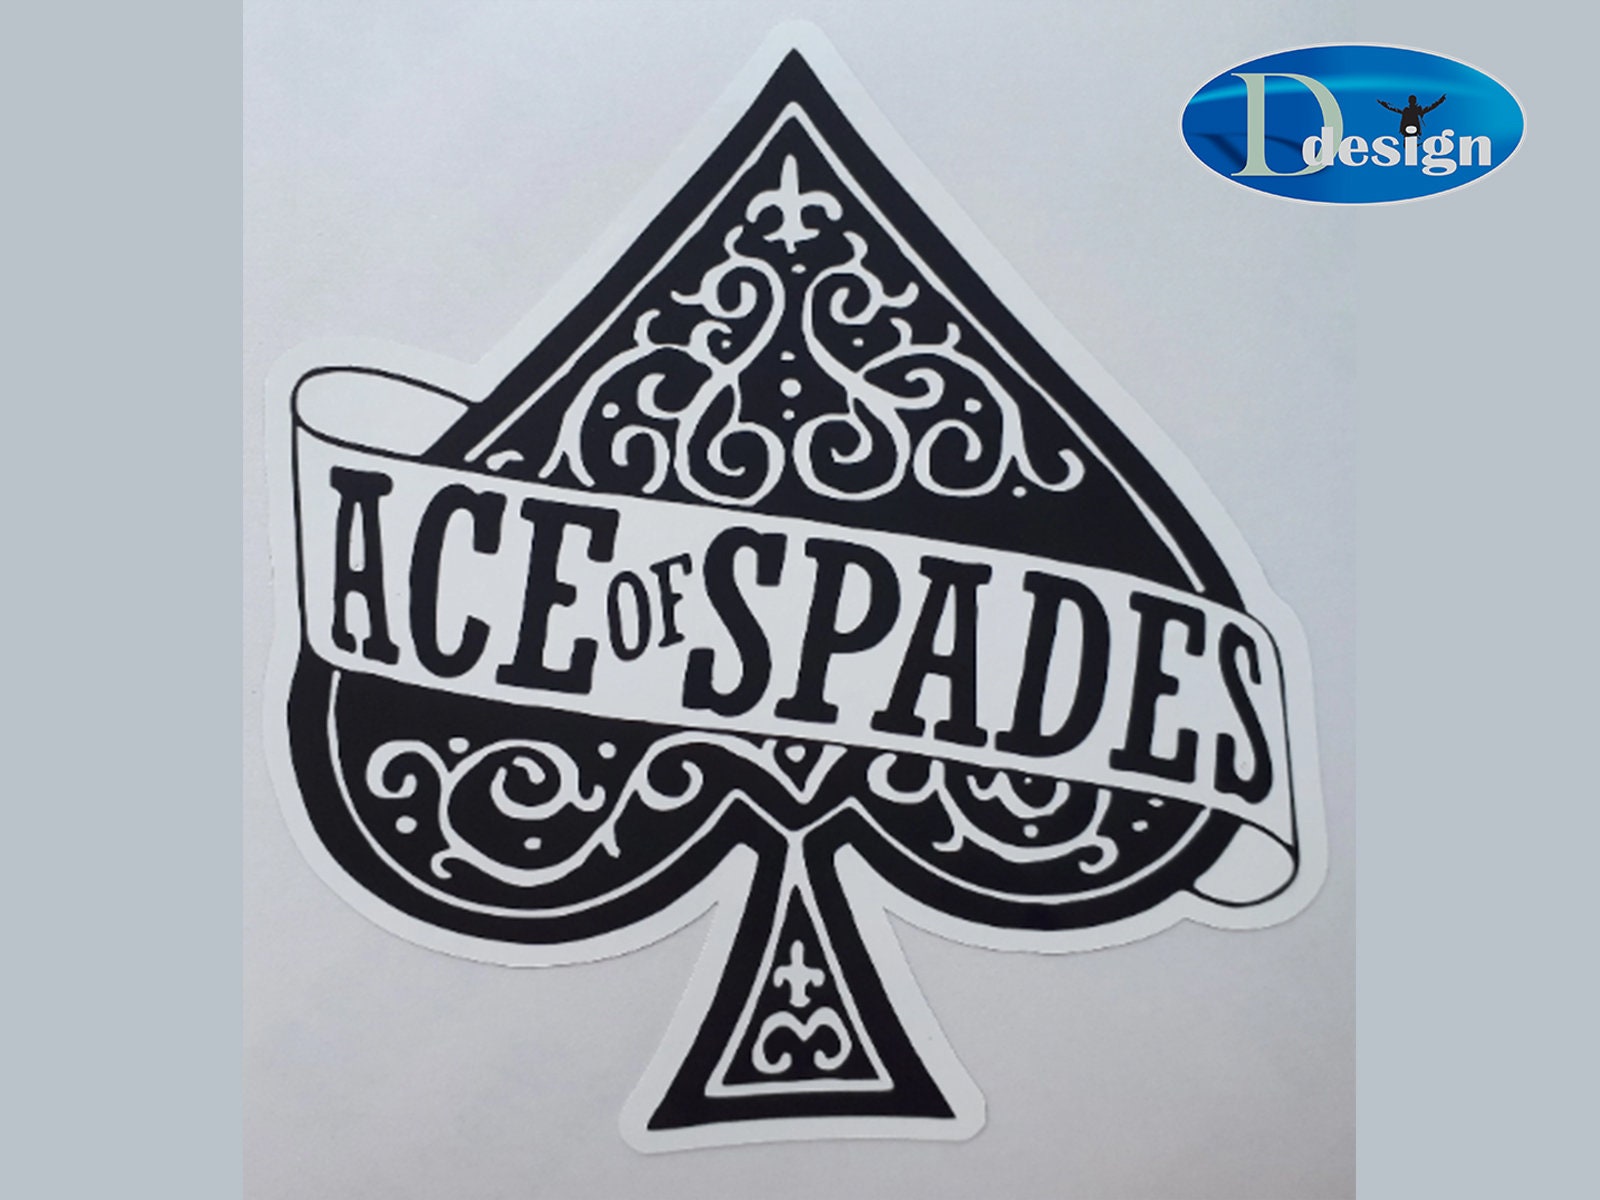 Motorhead Ace of Spades Logo - Wall Decal - Born to Lose Live to